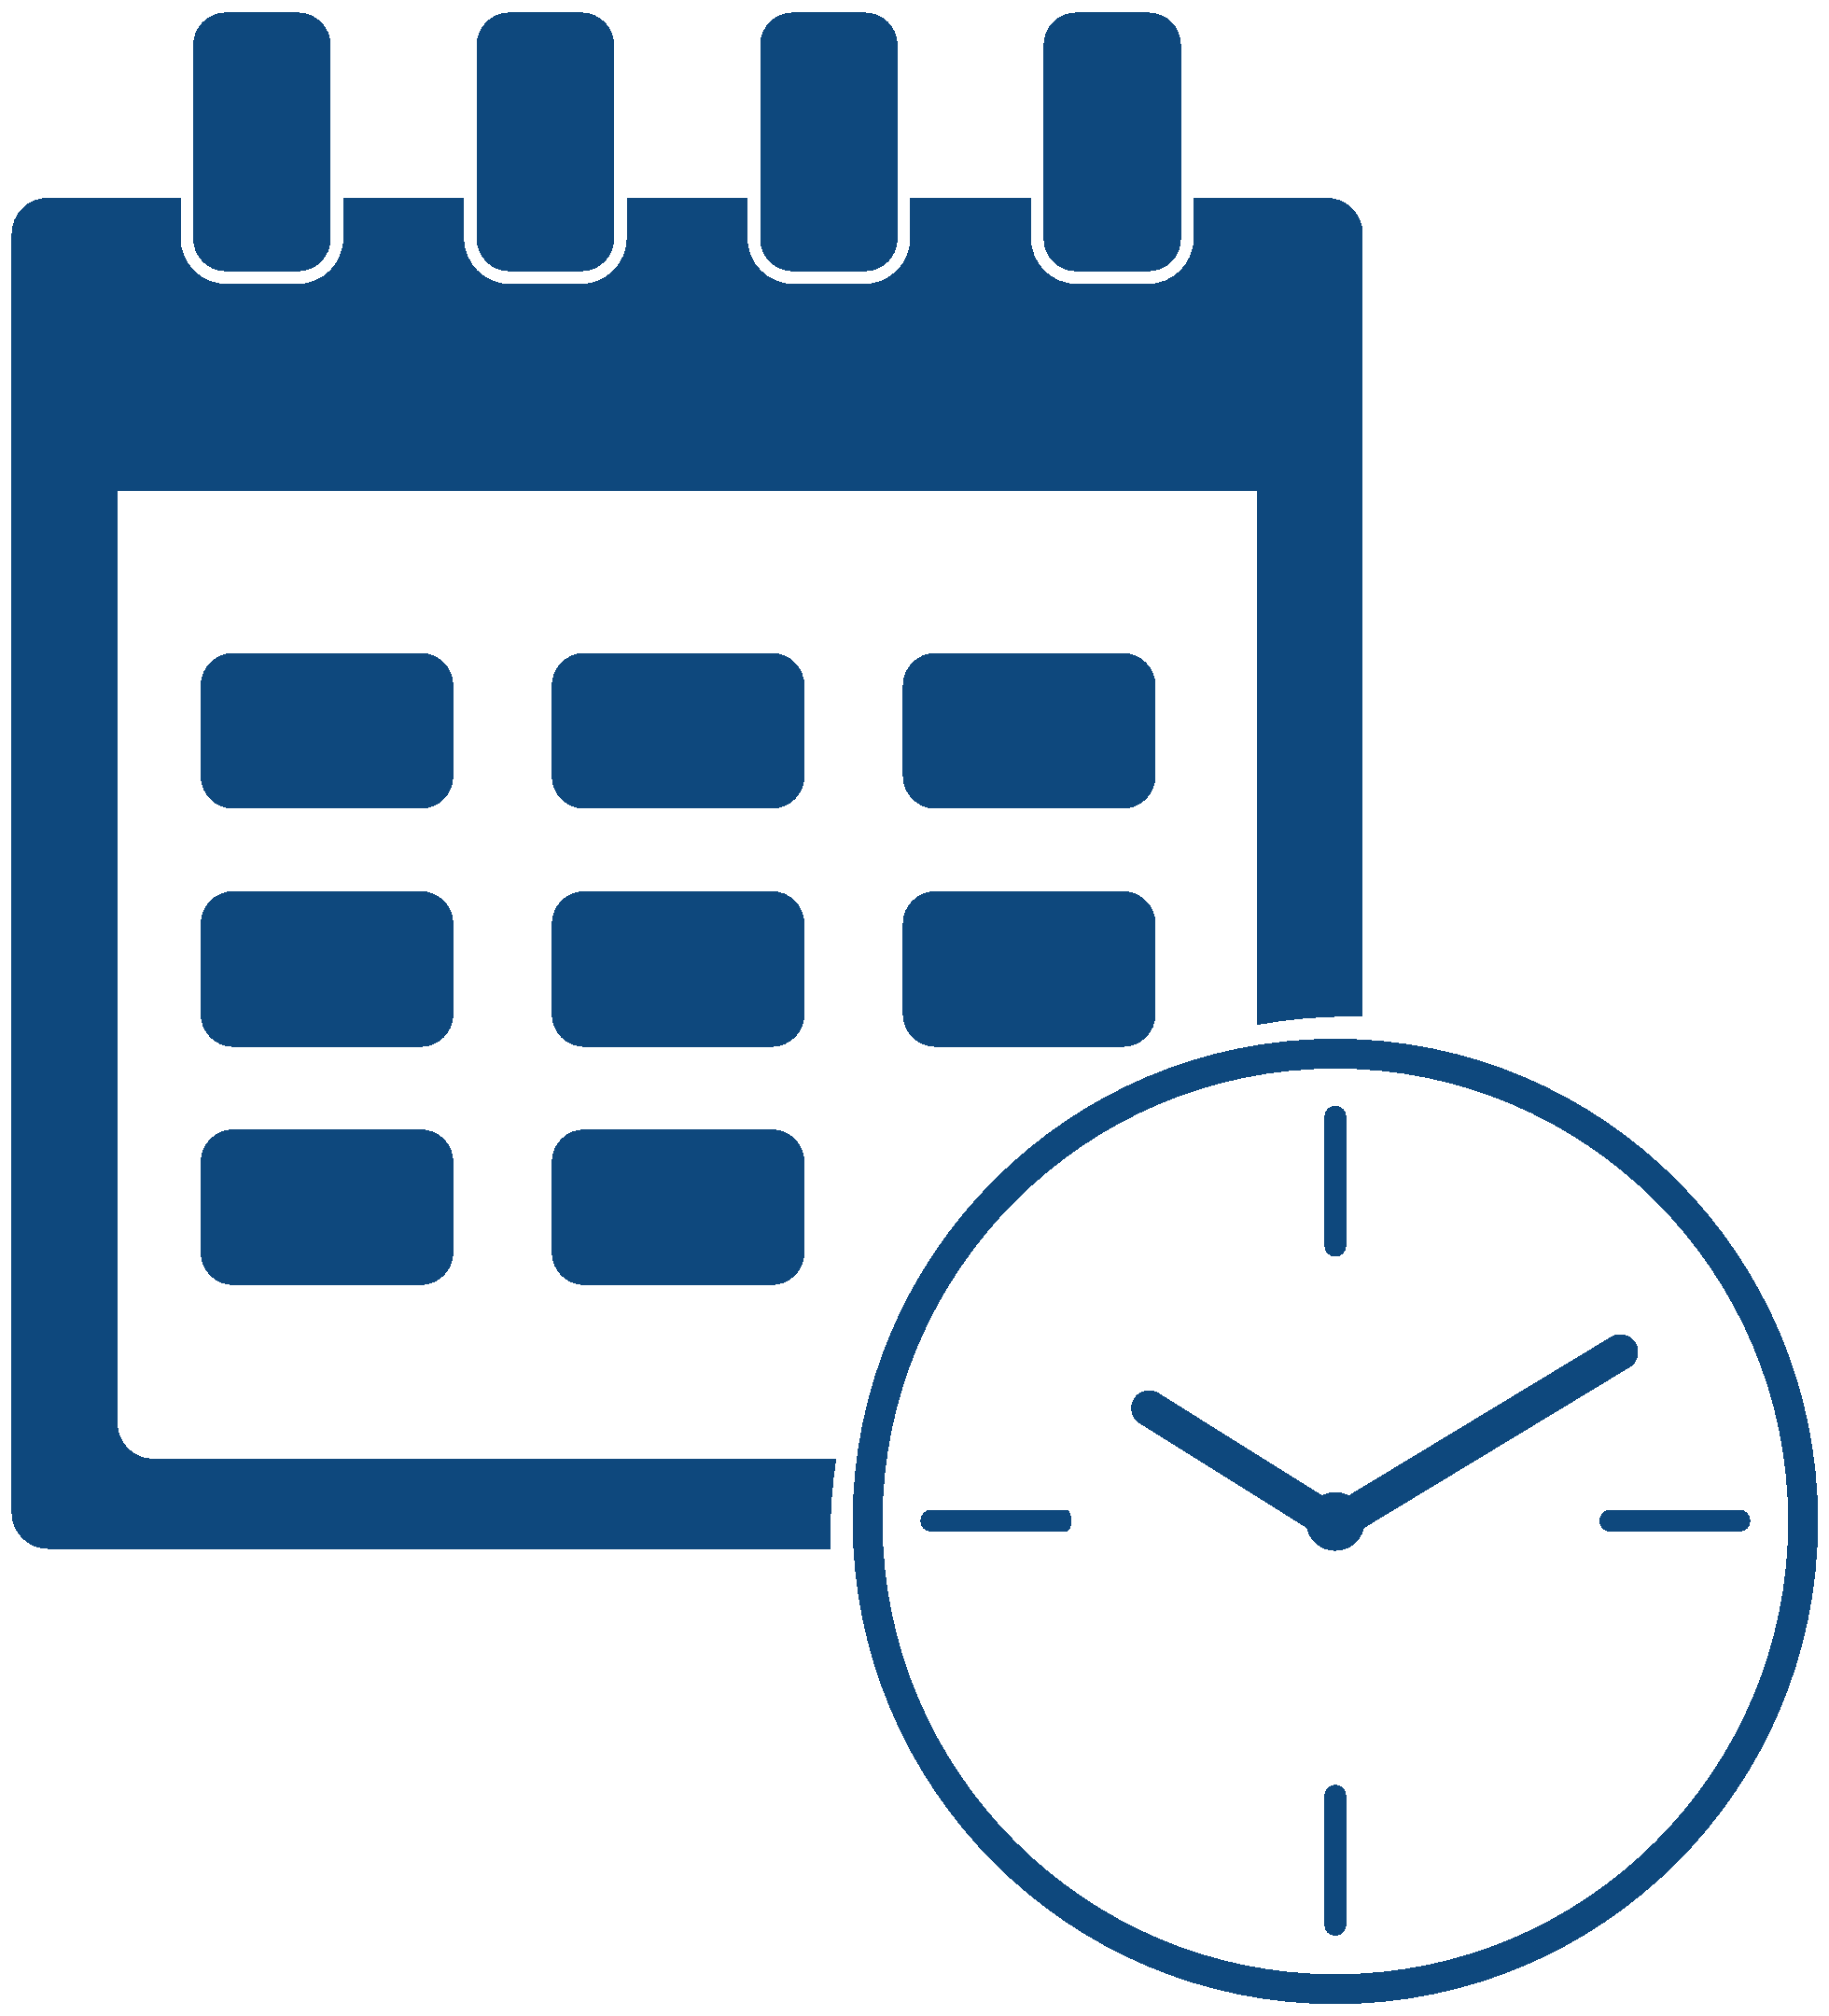 Calendar and clock icon indicating consultation schedule info